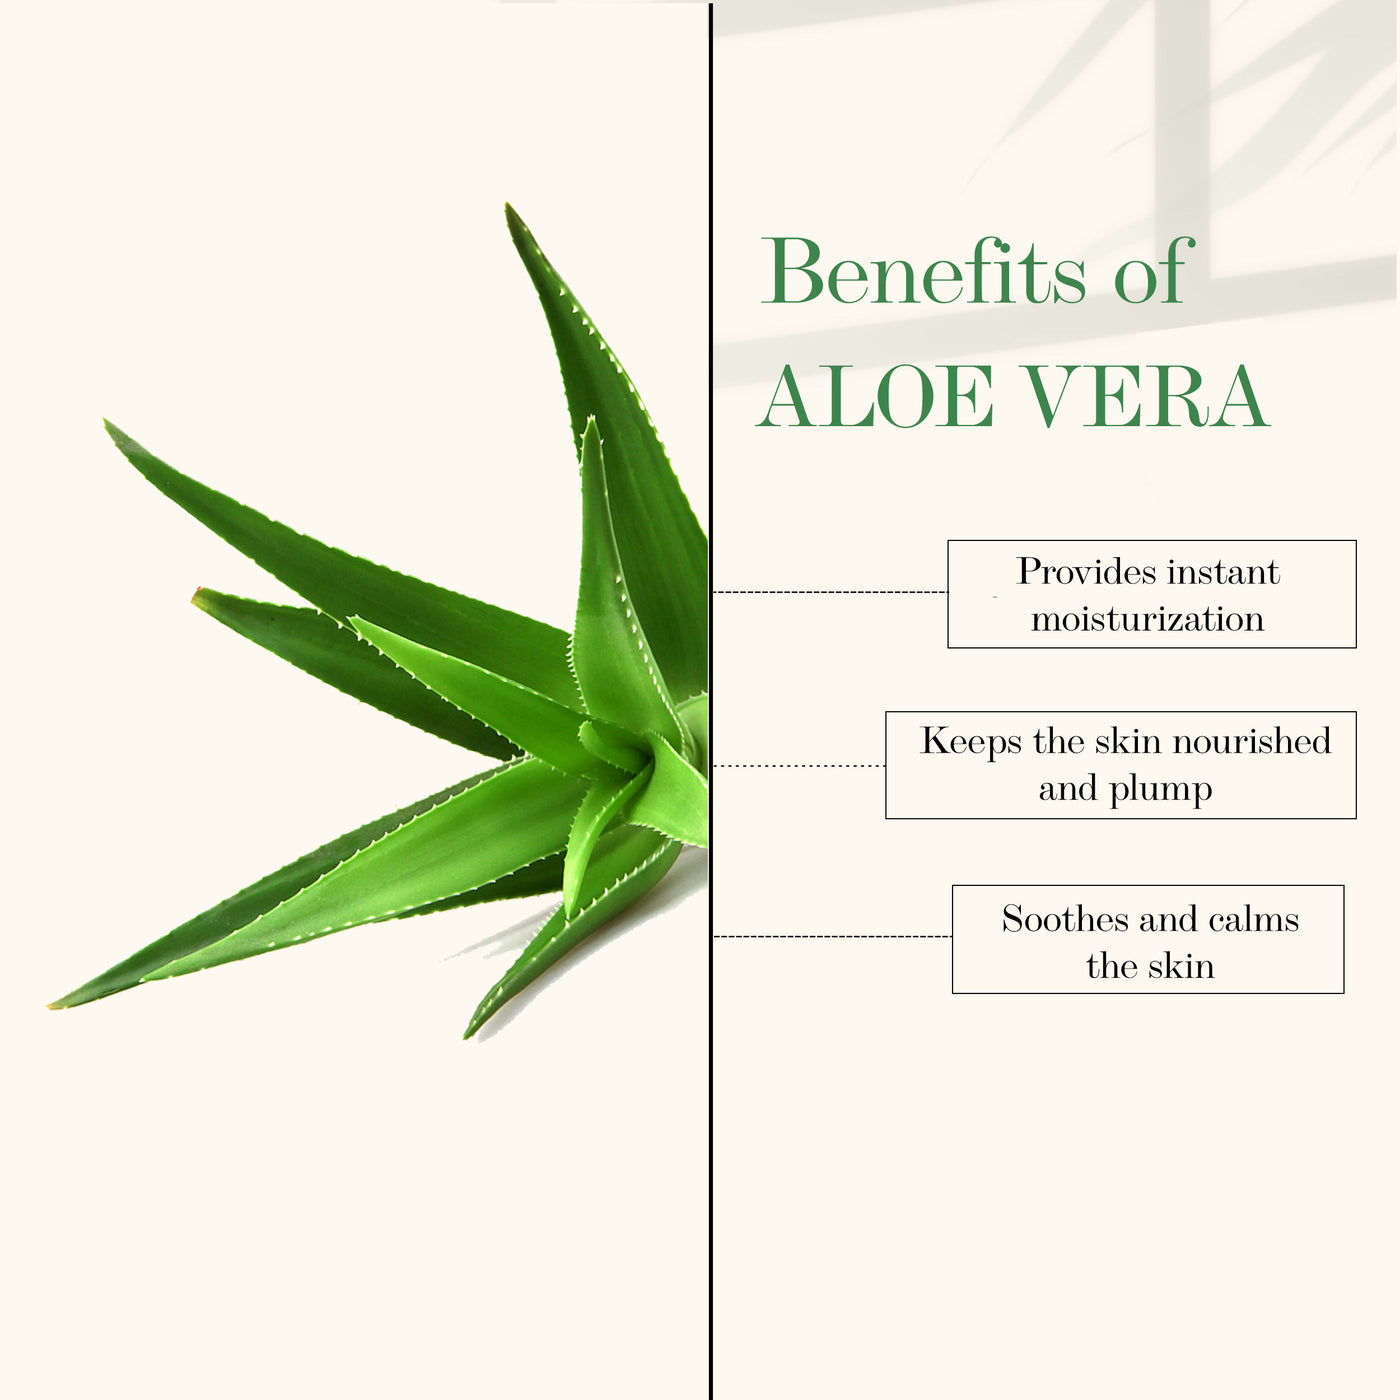 good-vibes-shea-butter-aloe-vera-nourishing-soothing-night-cream-moisturizing-soothing-no-parabens-no-sulphates-no-mineral-oil-50-gm-4